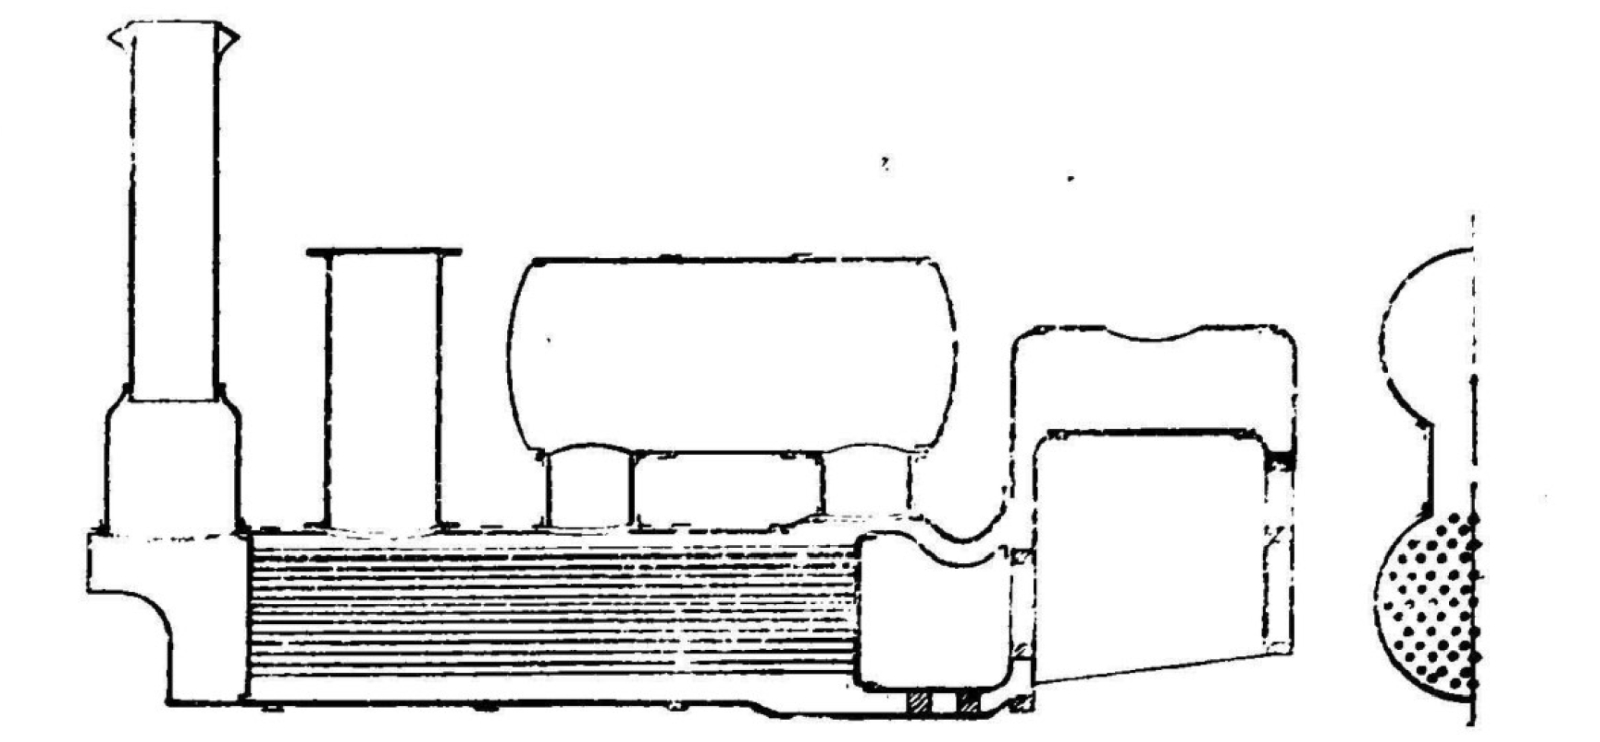 Section through the special, two-part boiler